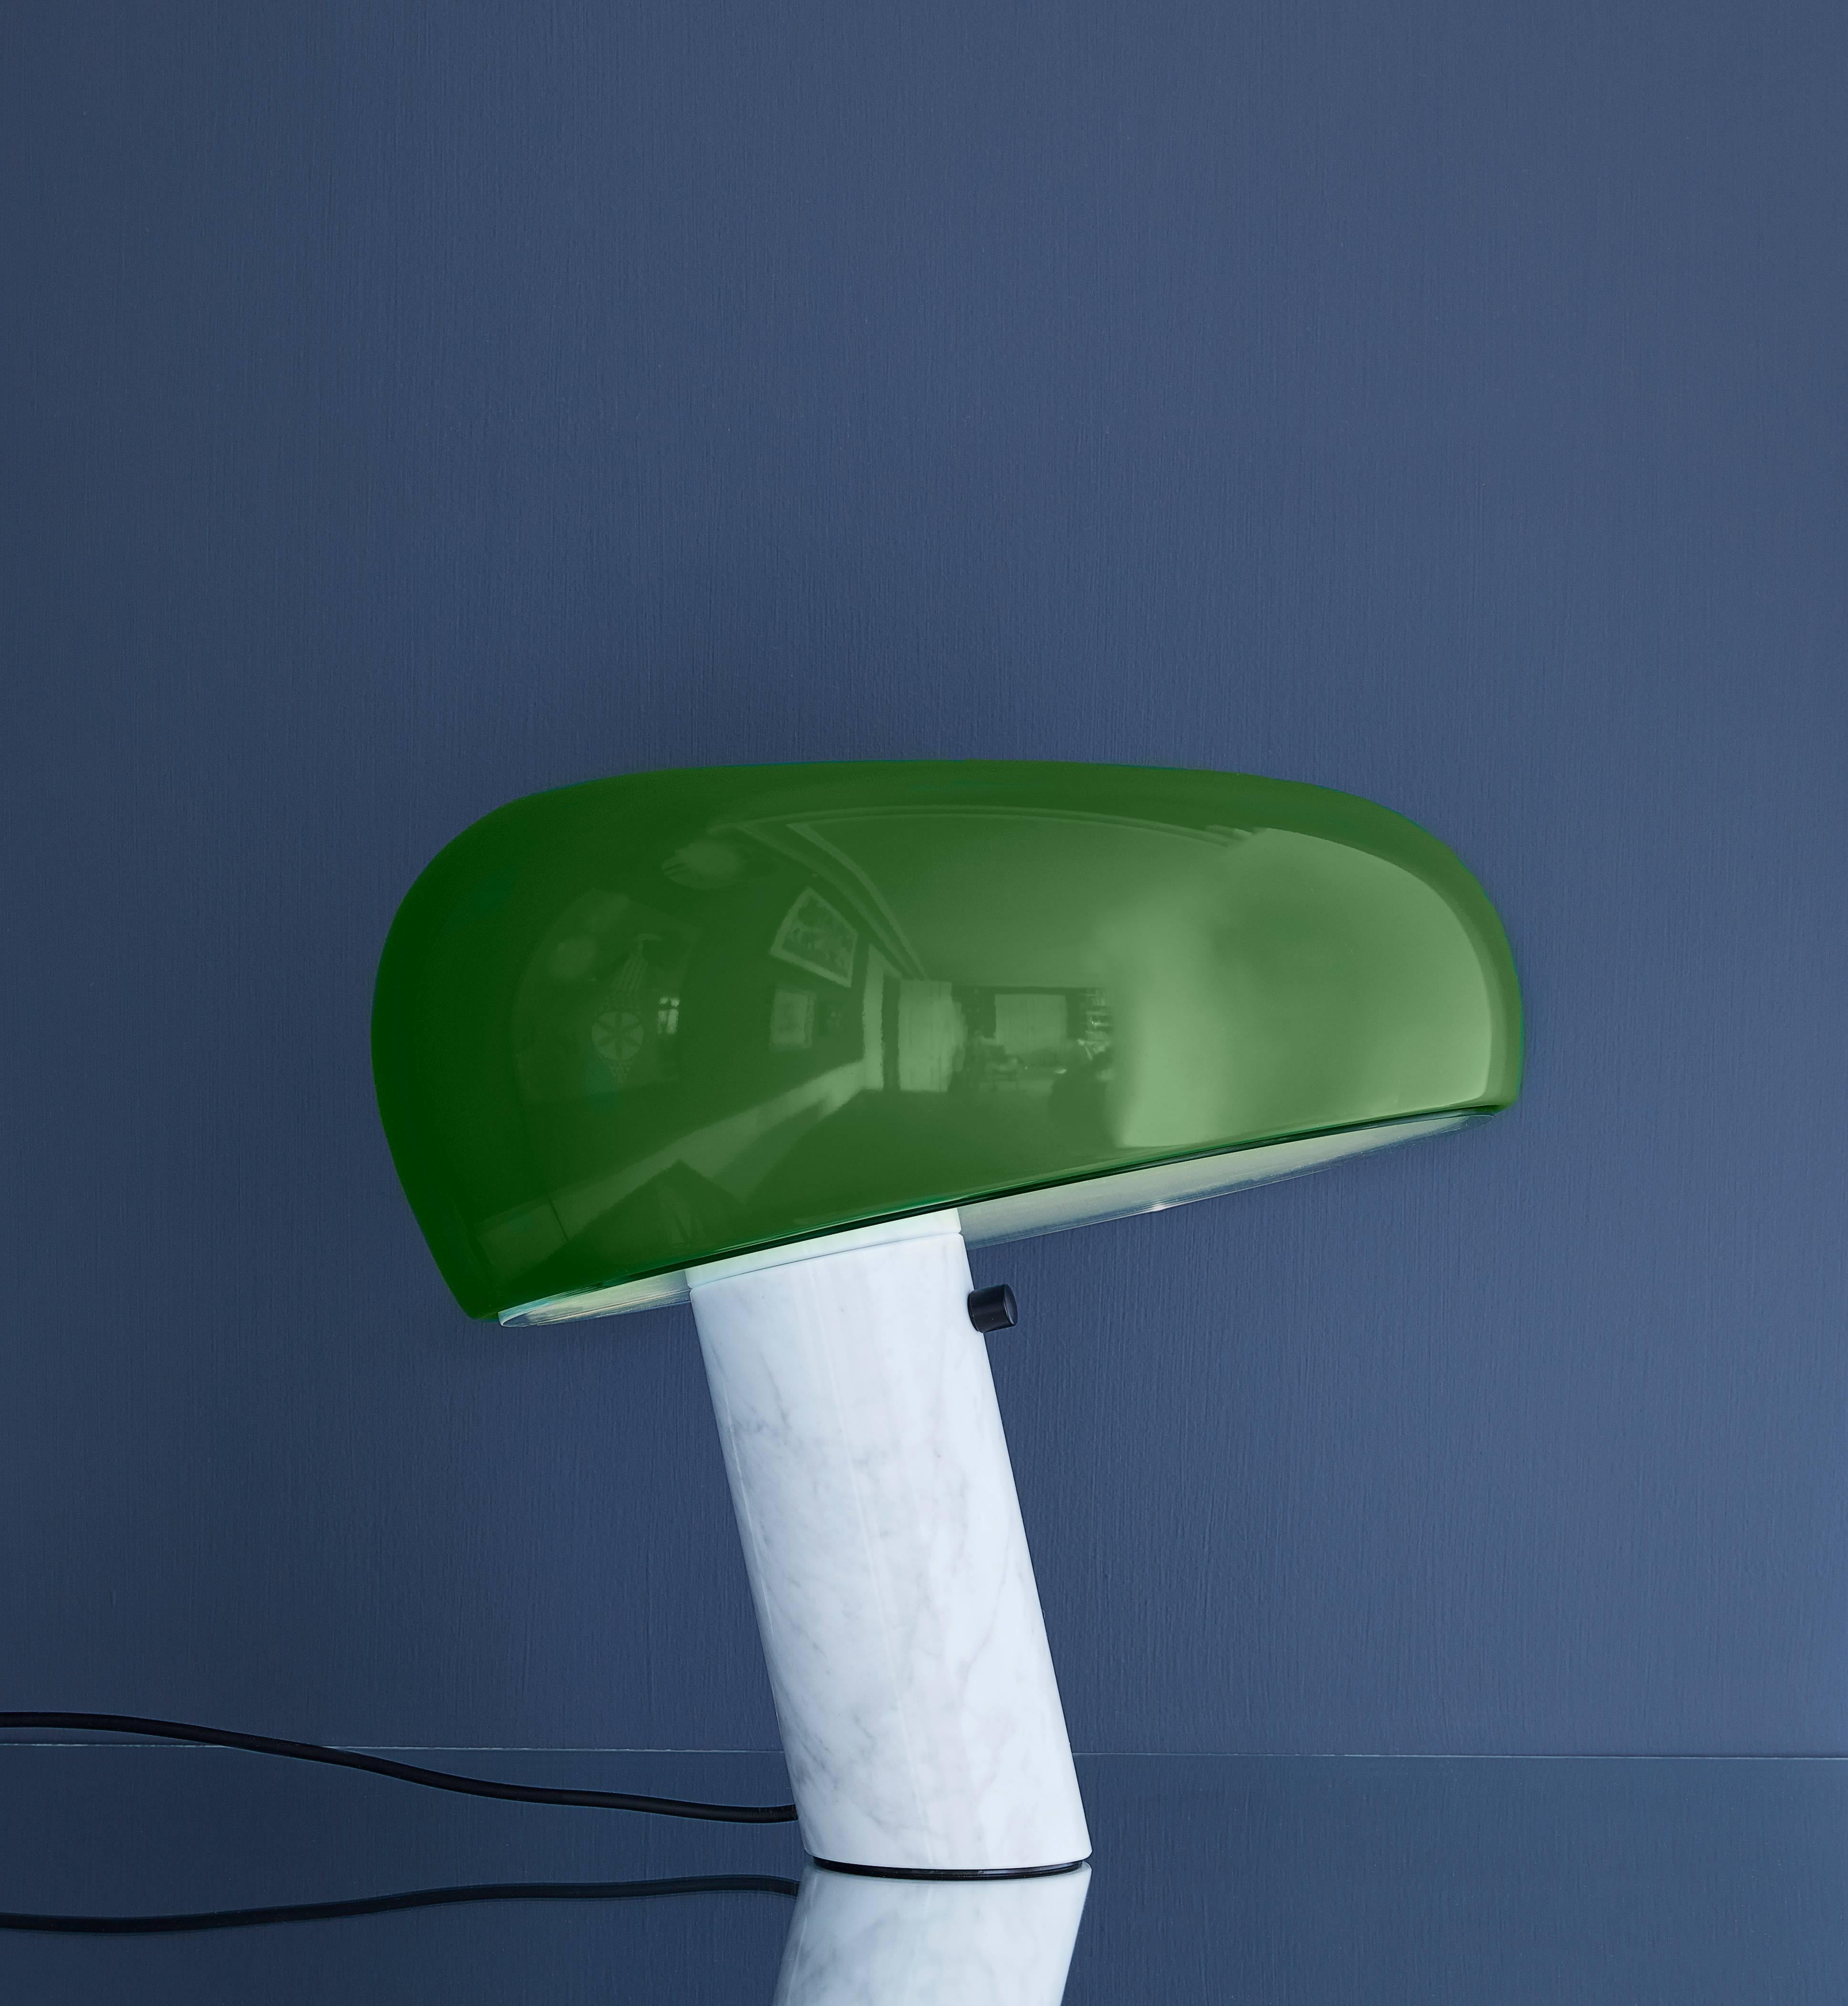 Snoopy lamp. Re-edition of Achille & Pier Giacomo Castiglioni’s 1967 design made for the apartment in September 2013.